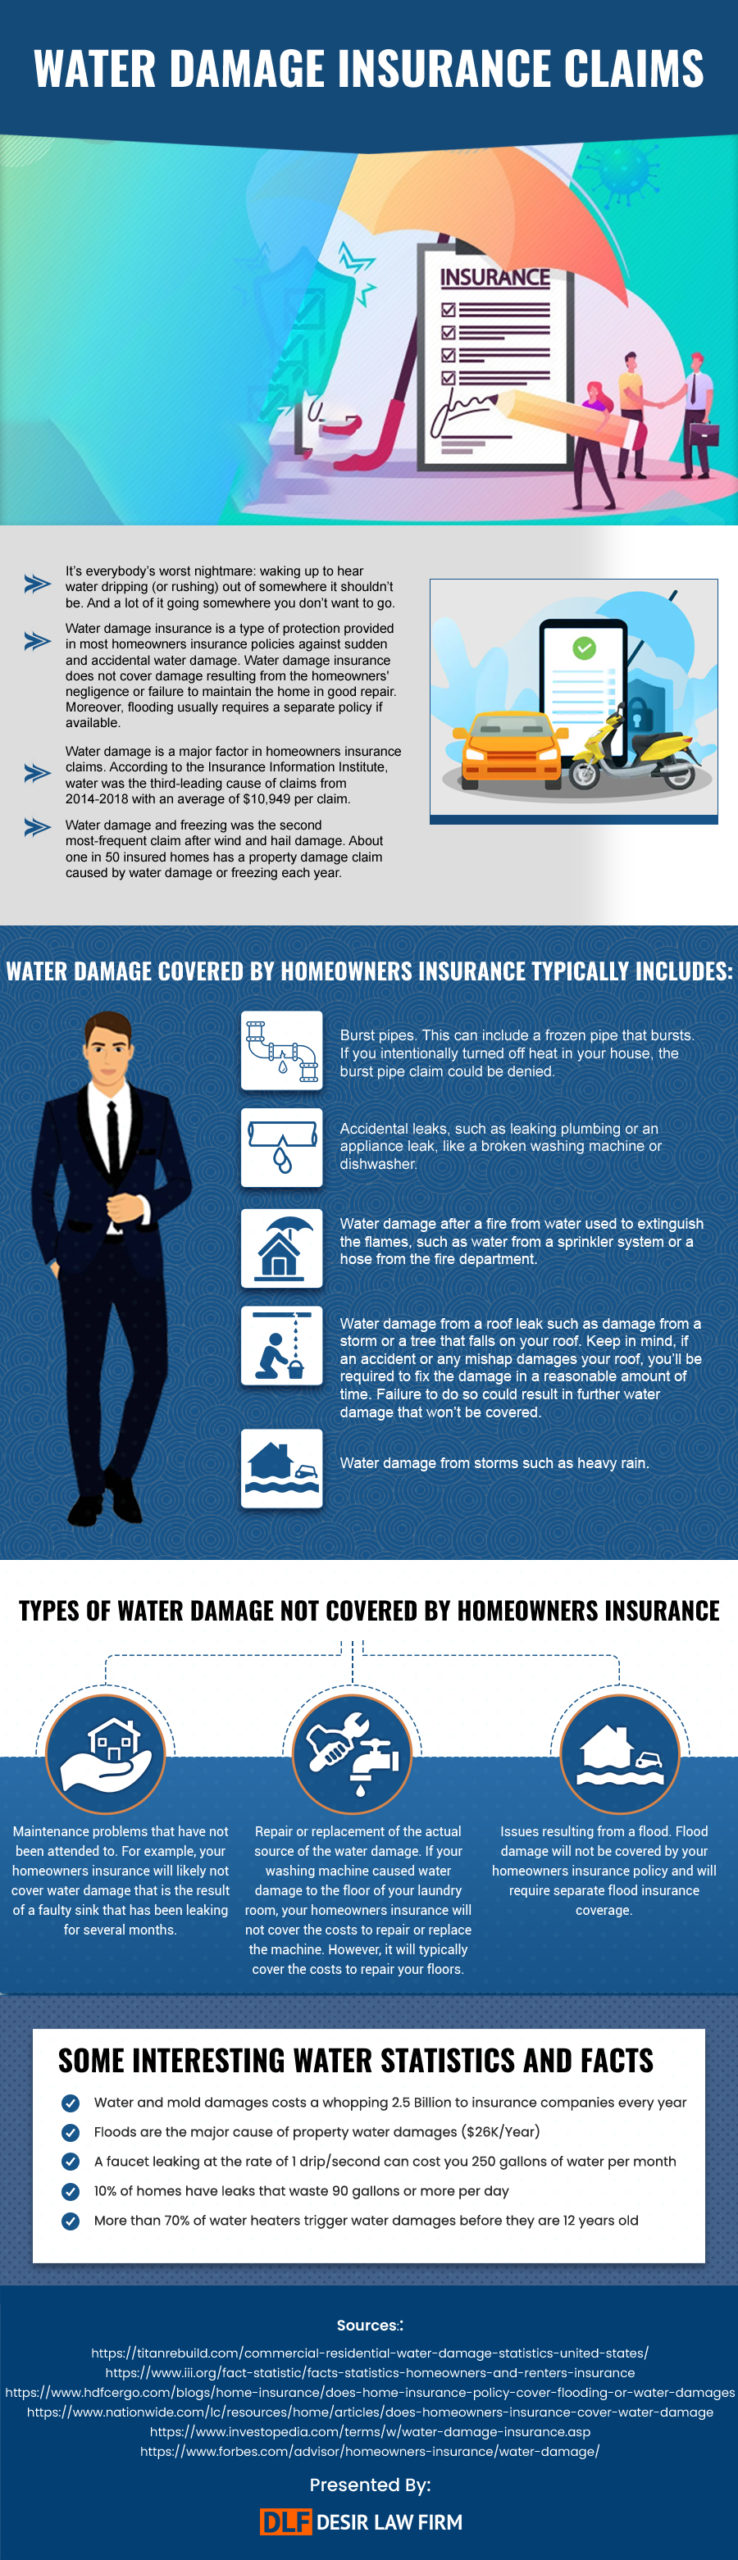 [Infographic] Water Damage Insurance Claims